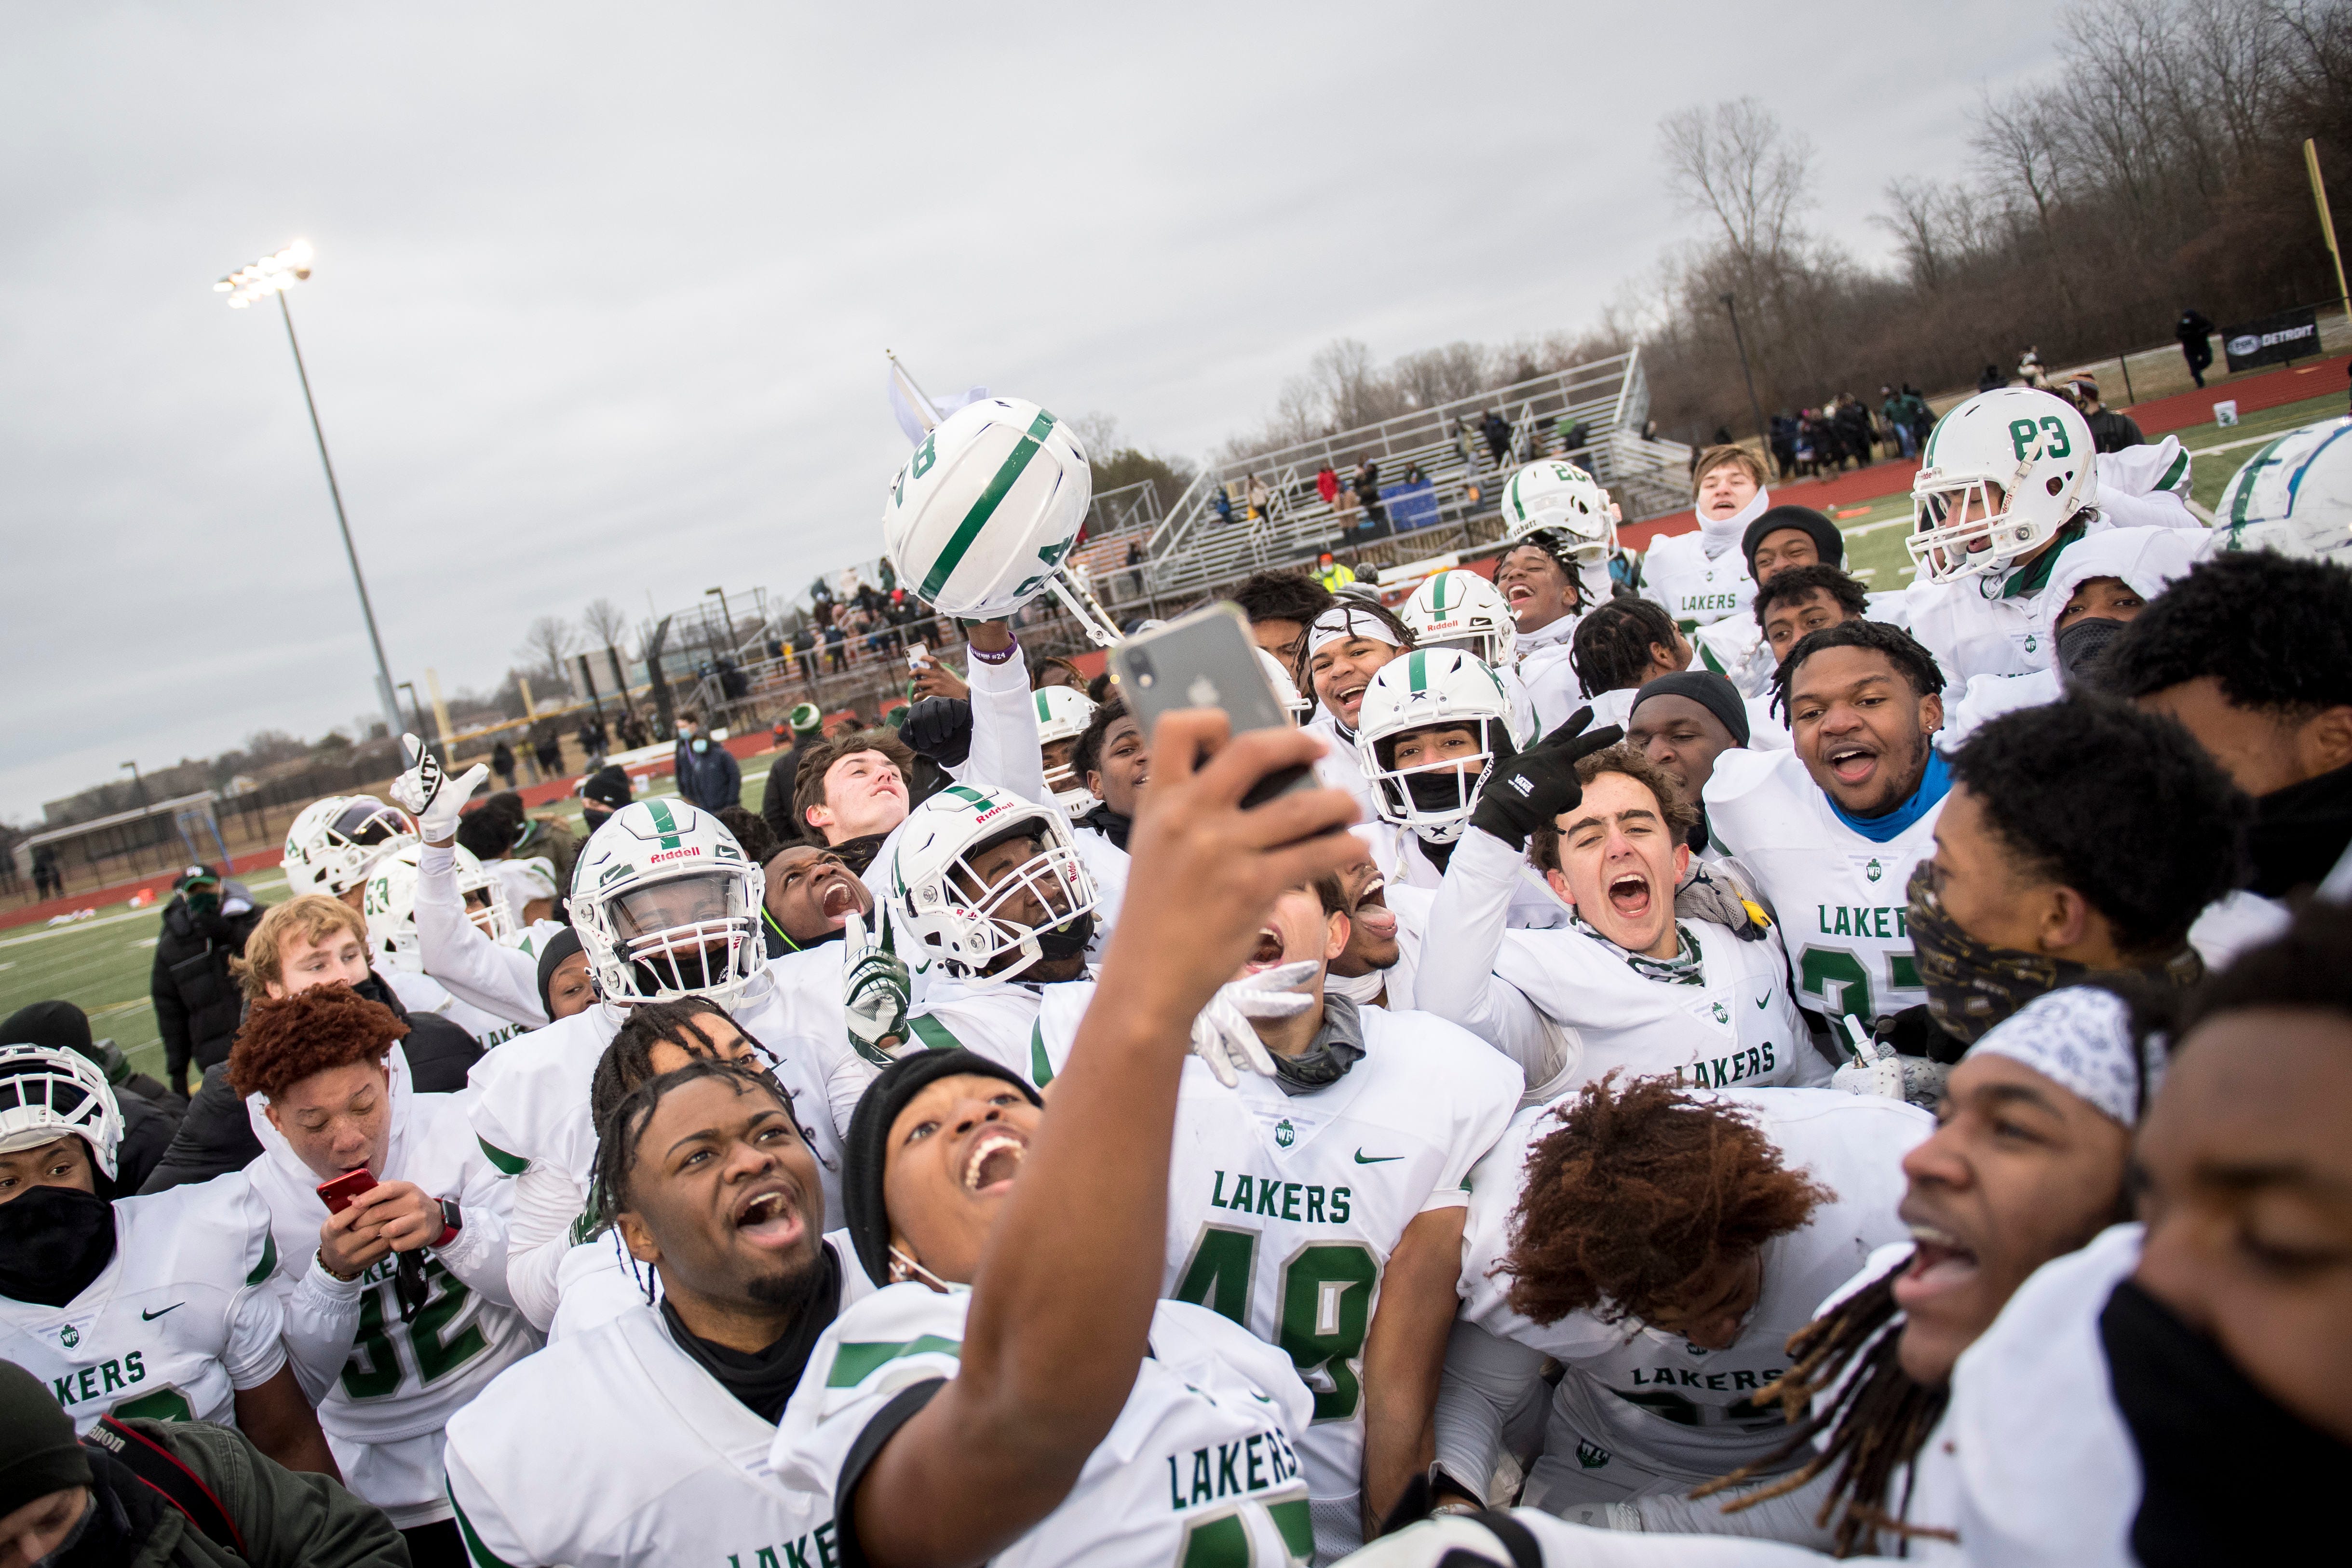 West Bloomfield celebrates their win against Belleville in double overtime, 35-34, at Belleville.